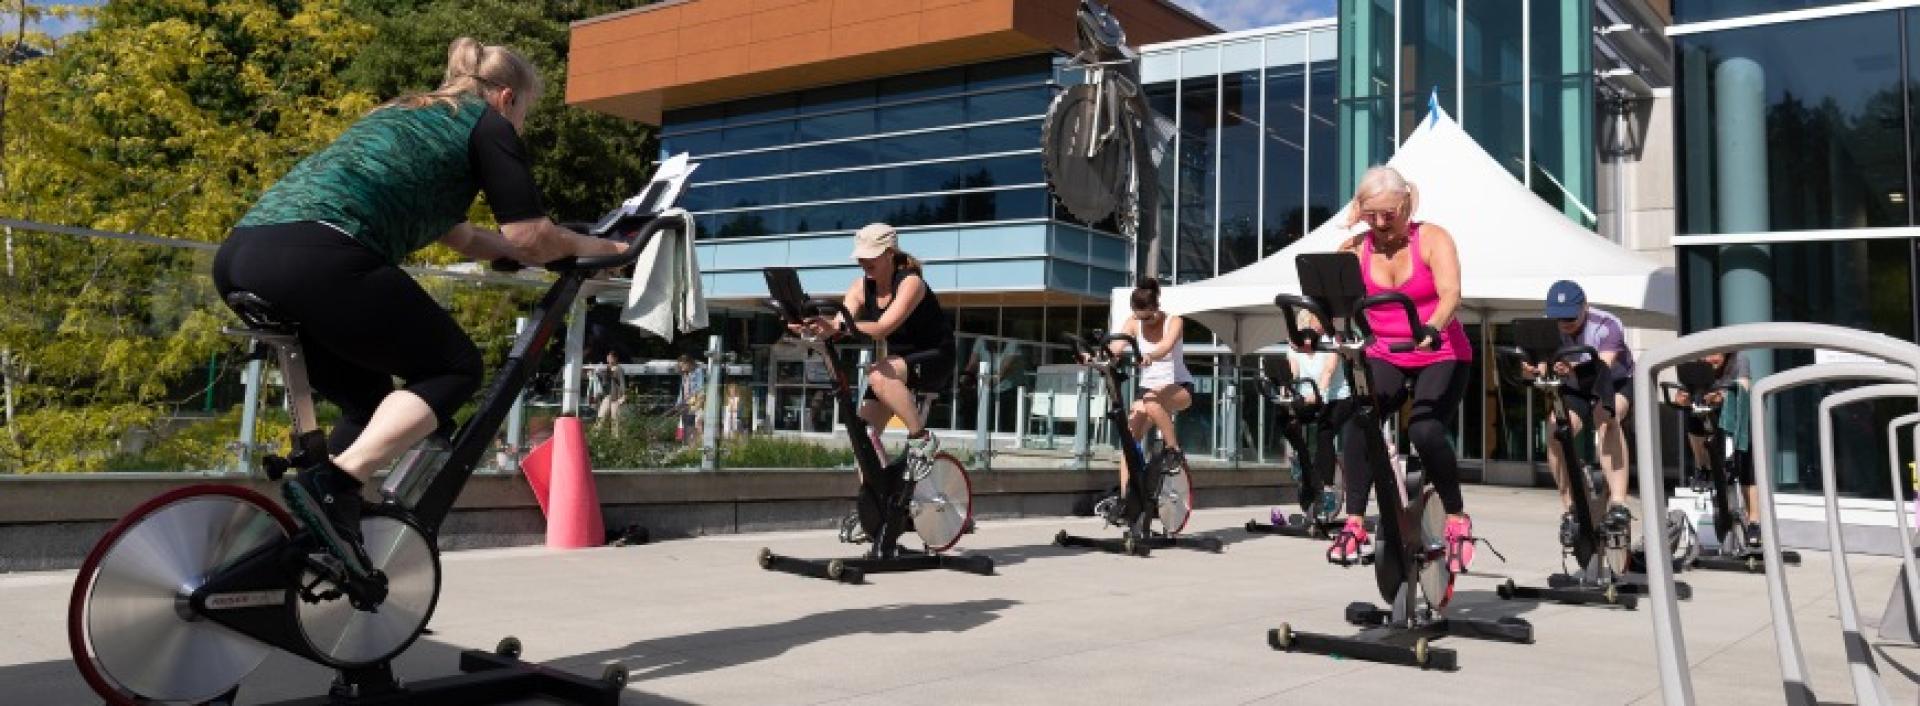 outdoor spin class